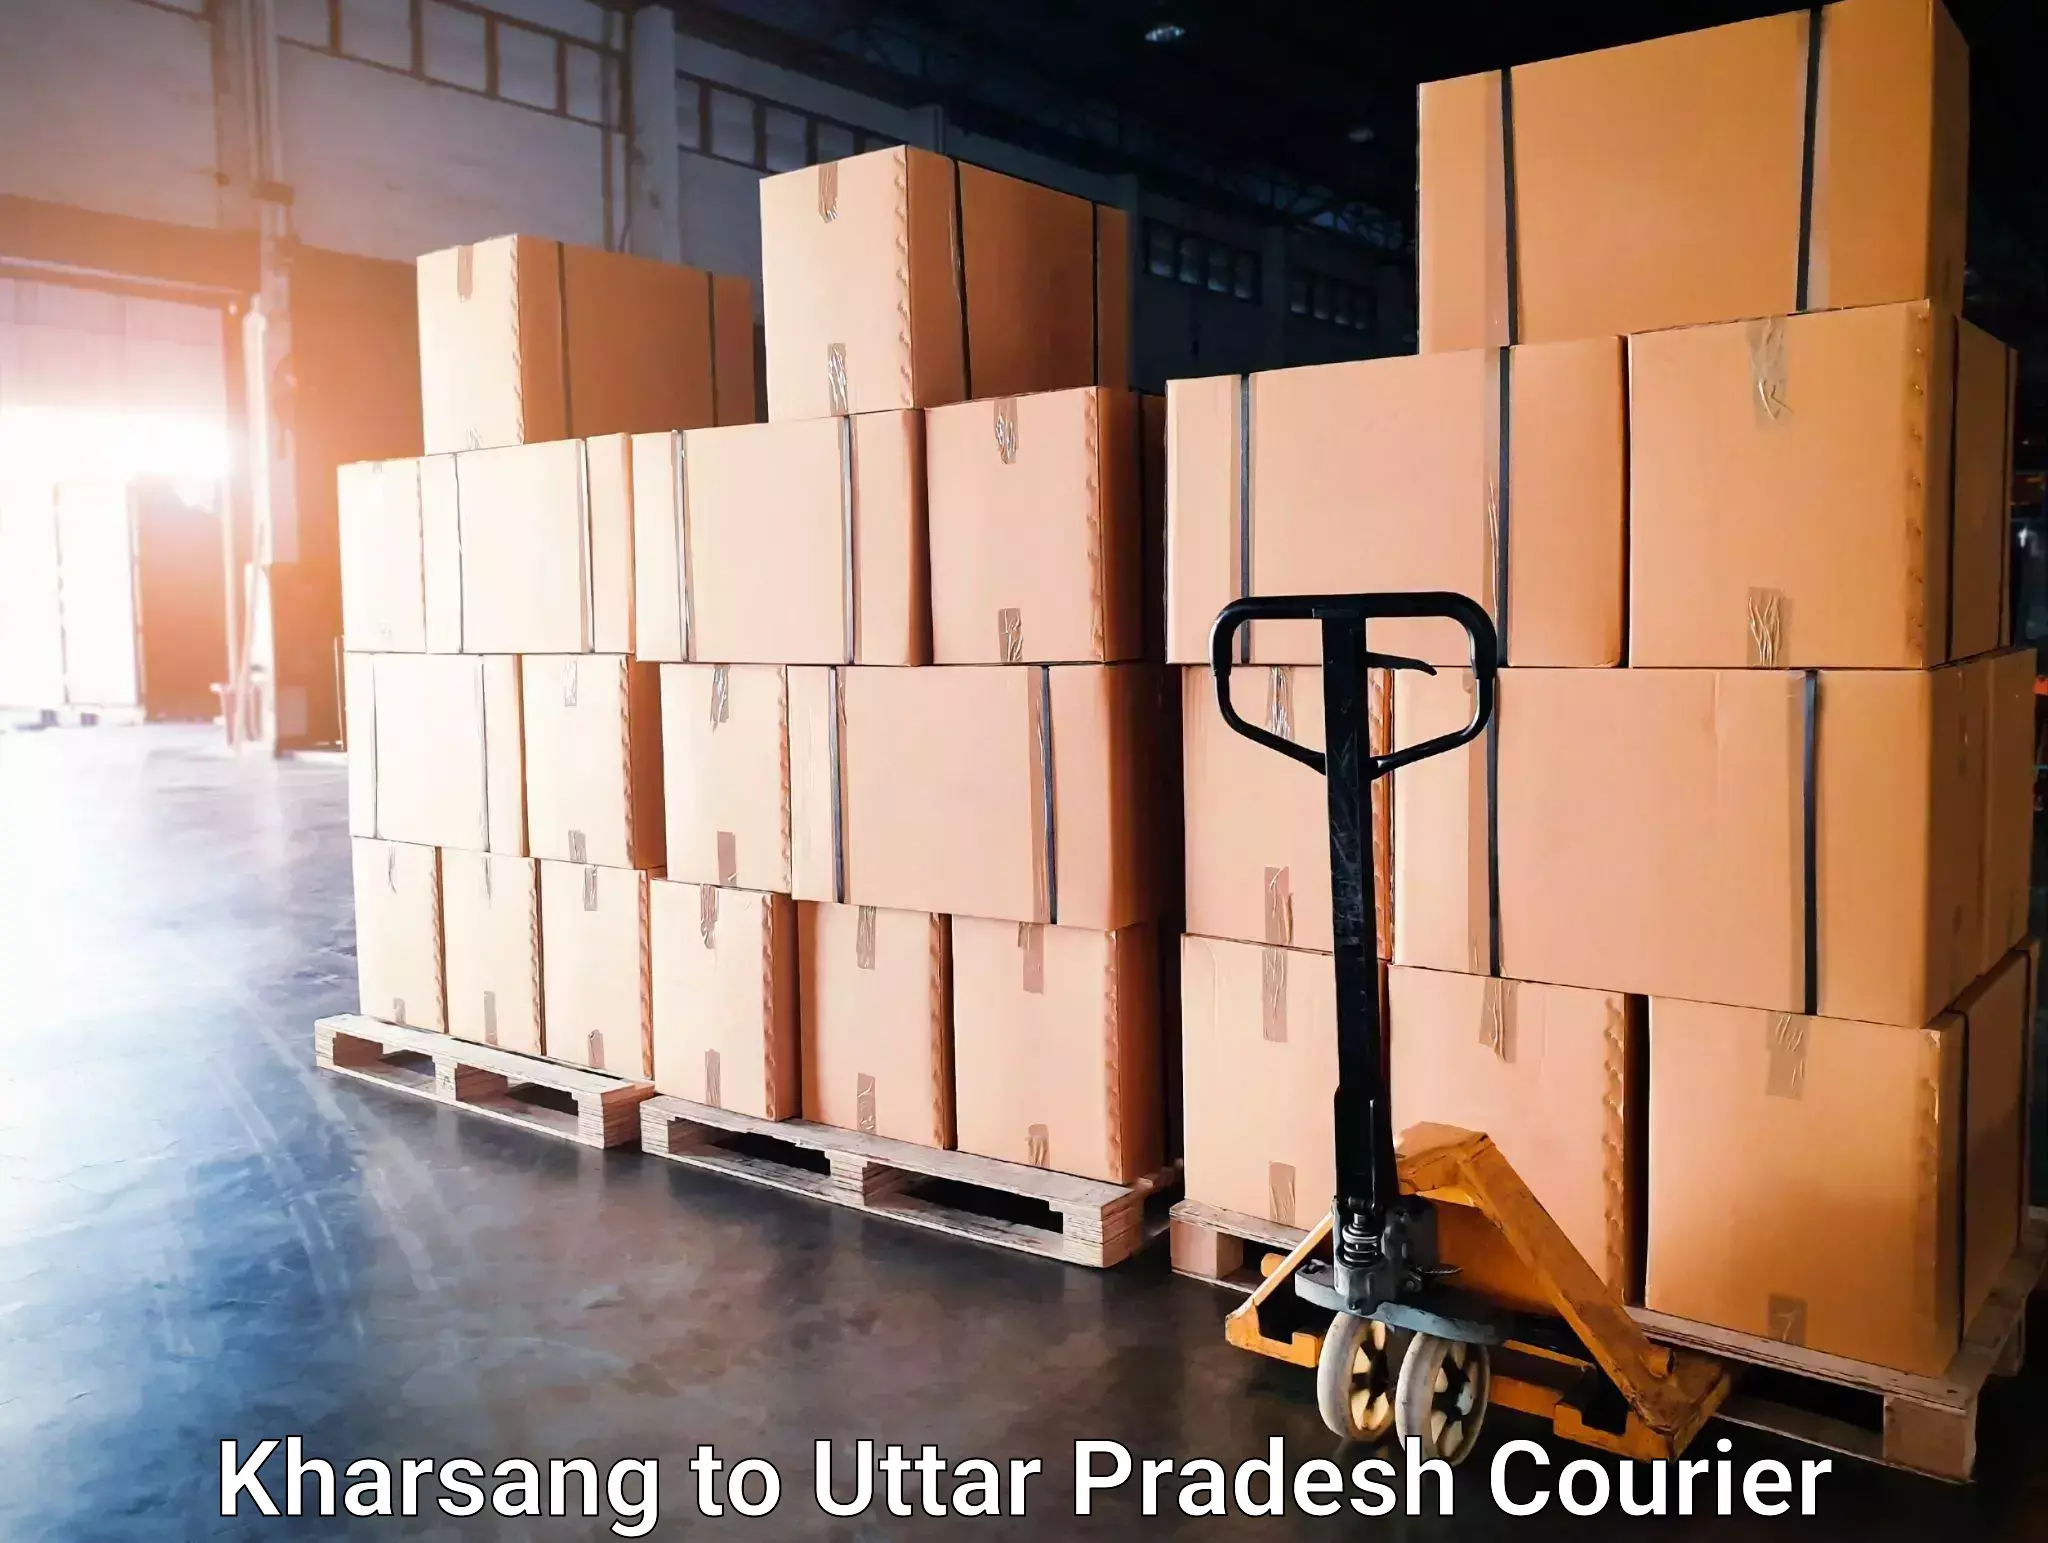 Courier service comparison in Kharsang to Sadat